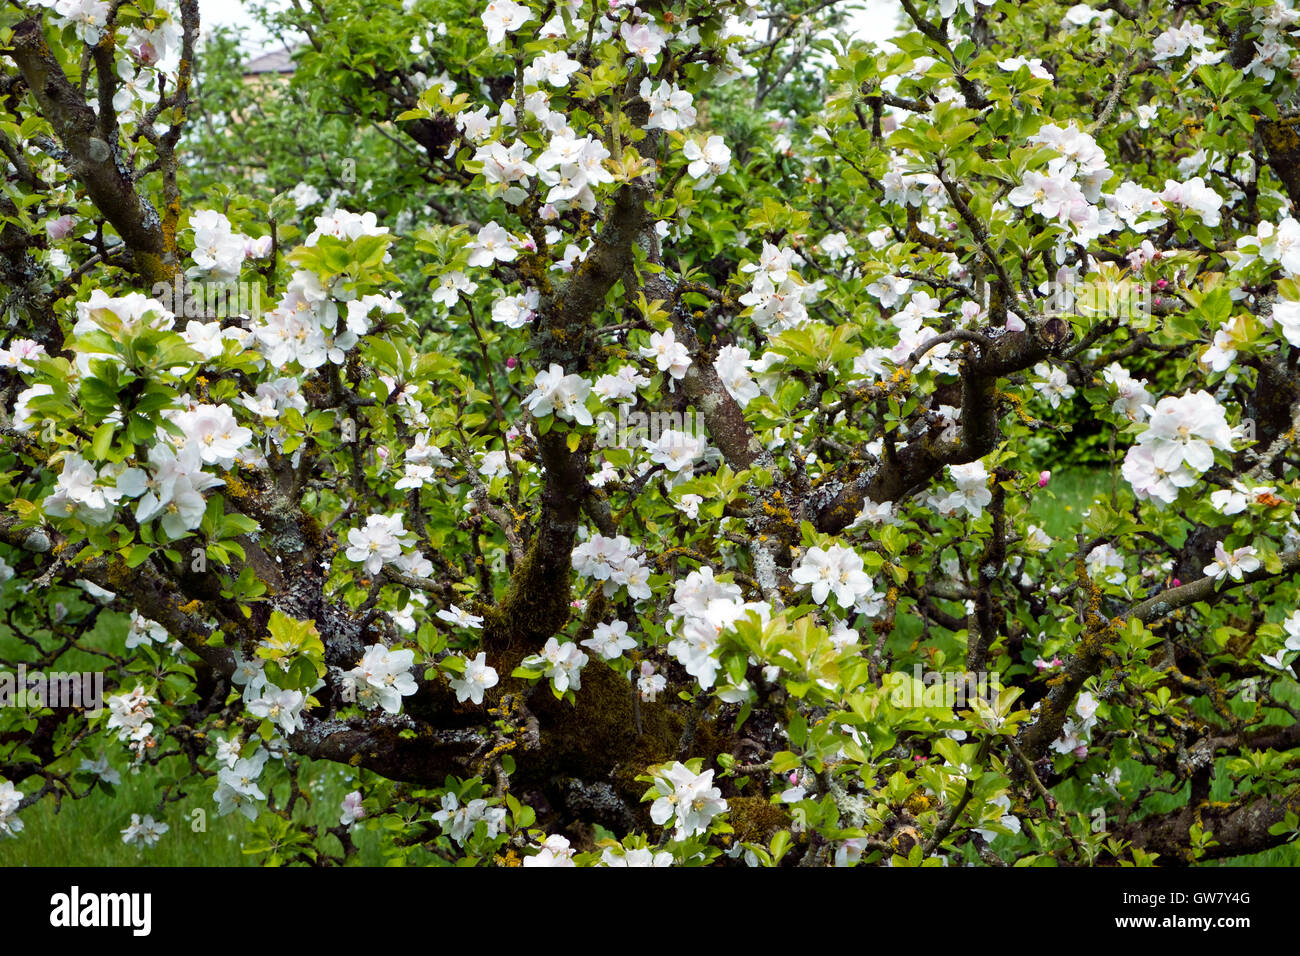 Profuse white spring blossom on a fruit tree Stock Photo